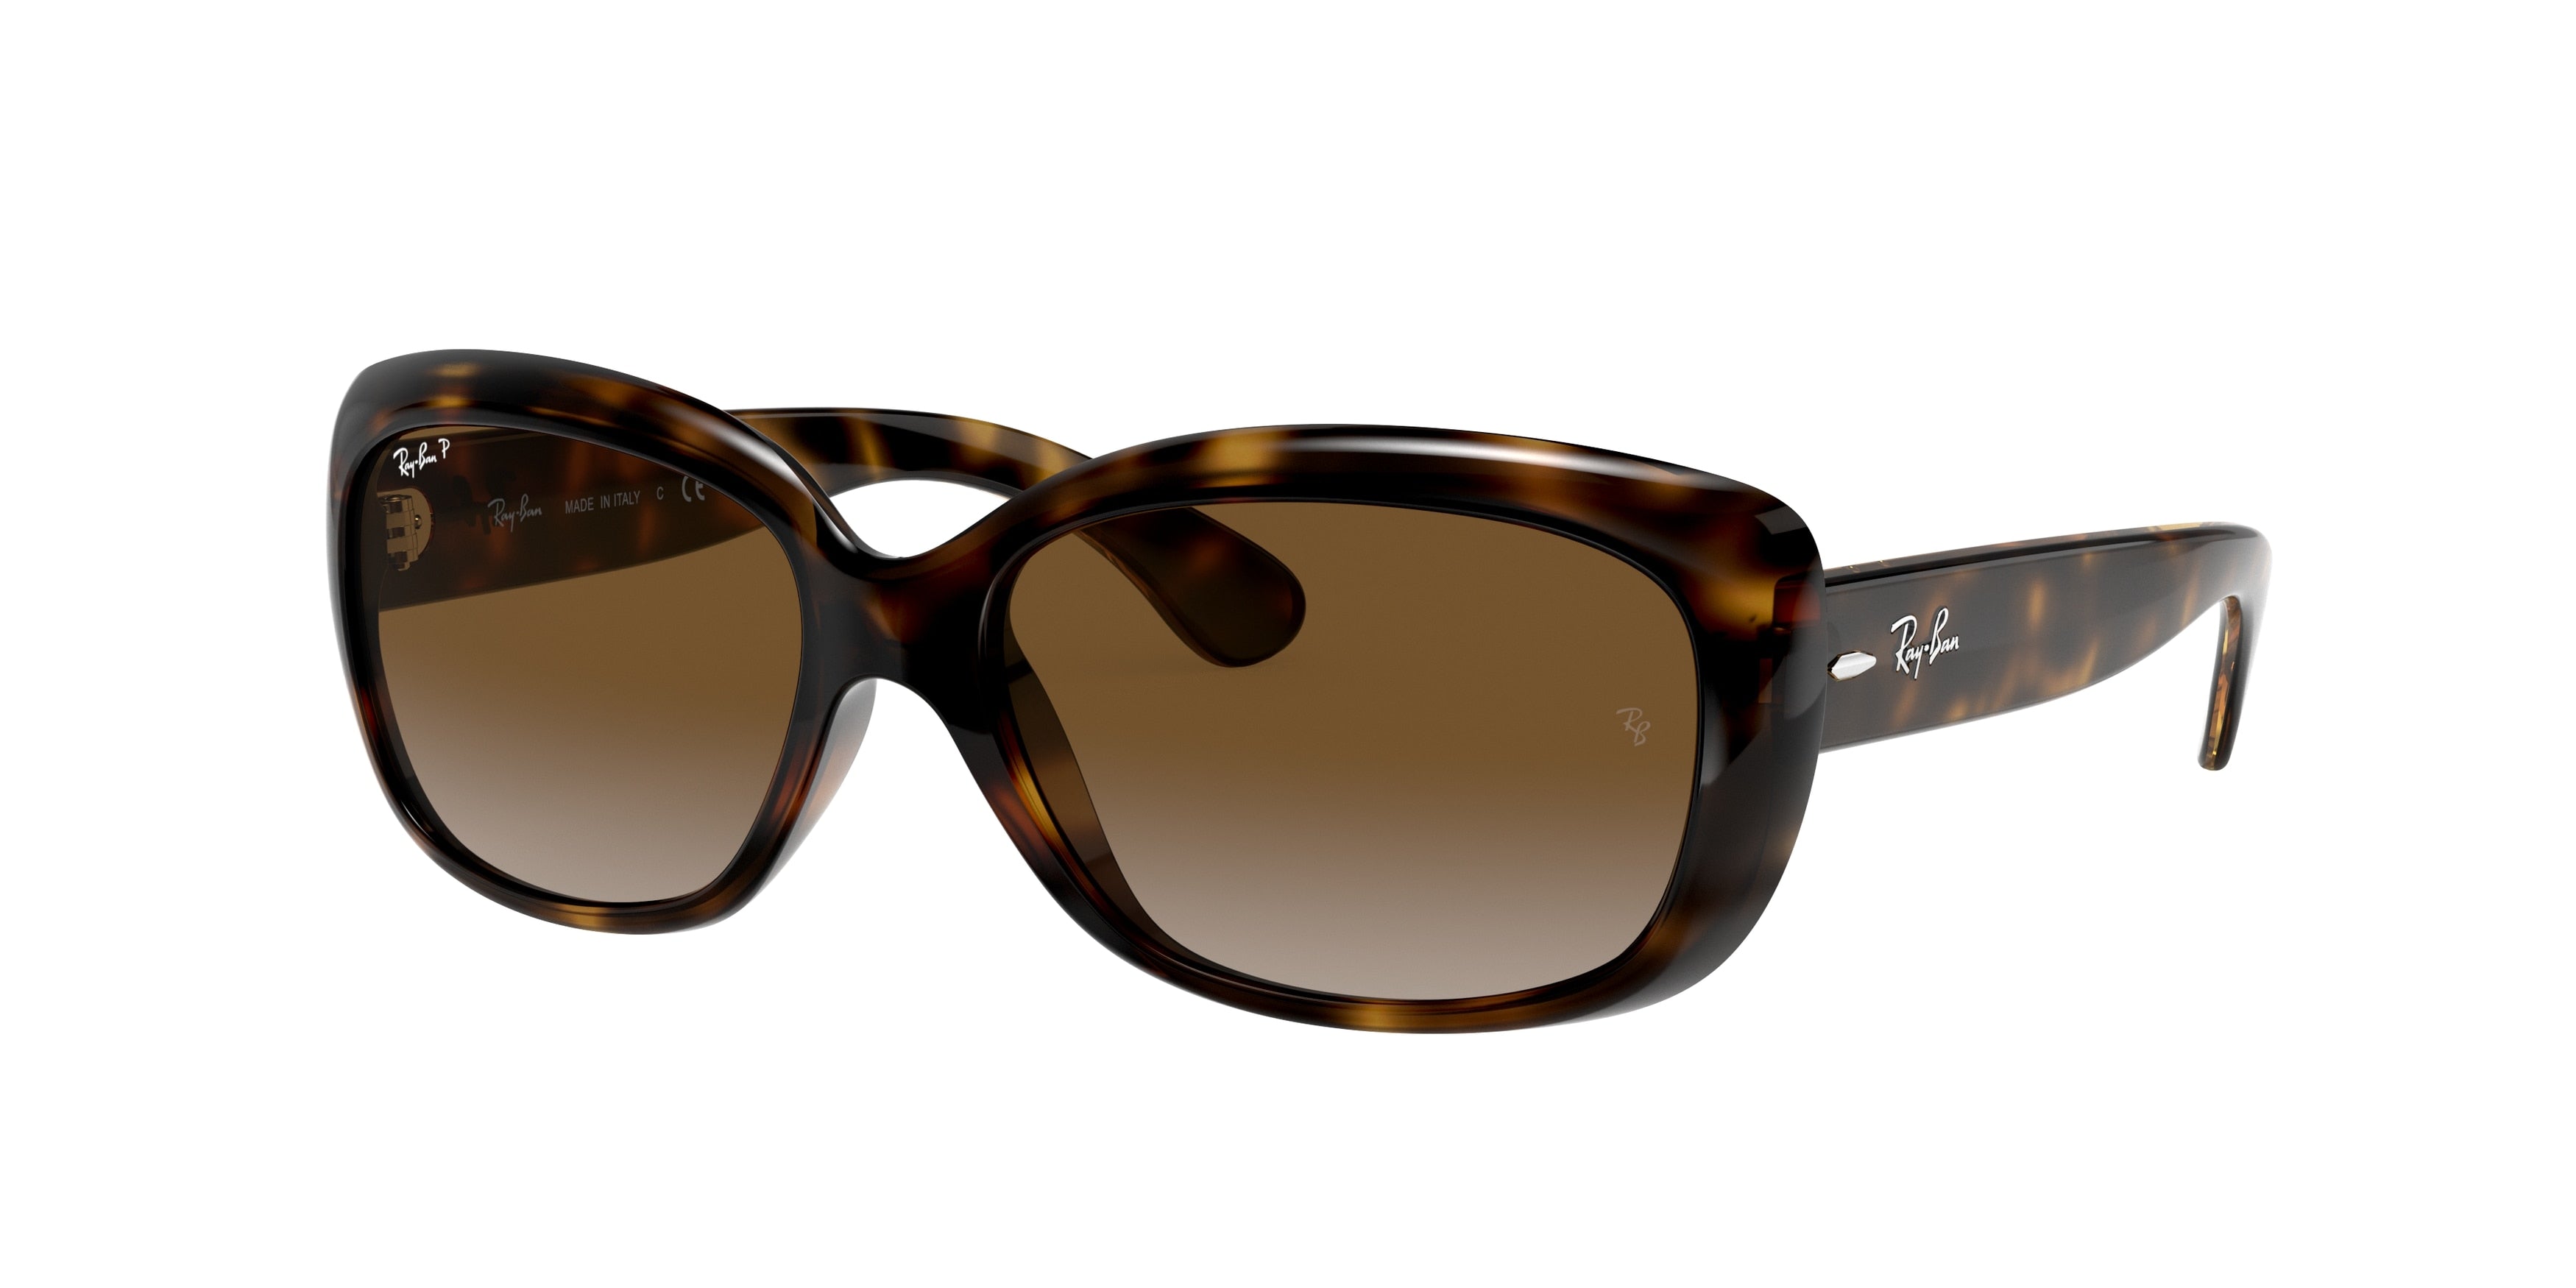 Ray-Ban JACKIE OHH RB4101 Butterfly Sunglasses  710/T5-Light Havana 57-135-17 - Color Map Tortoise